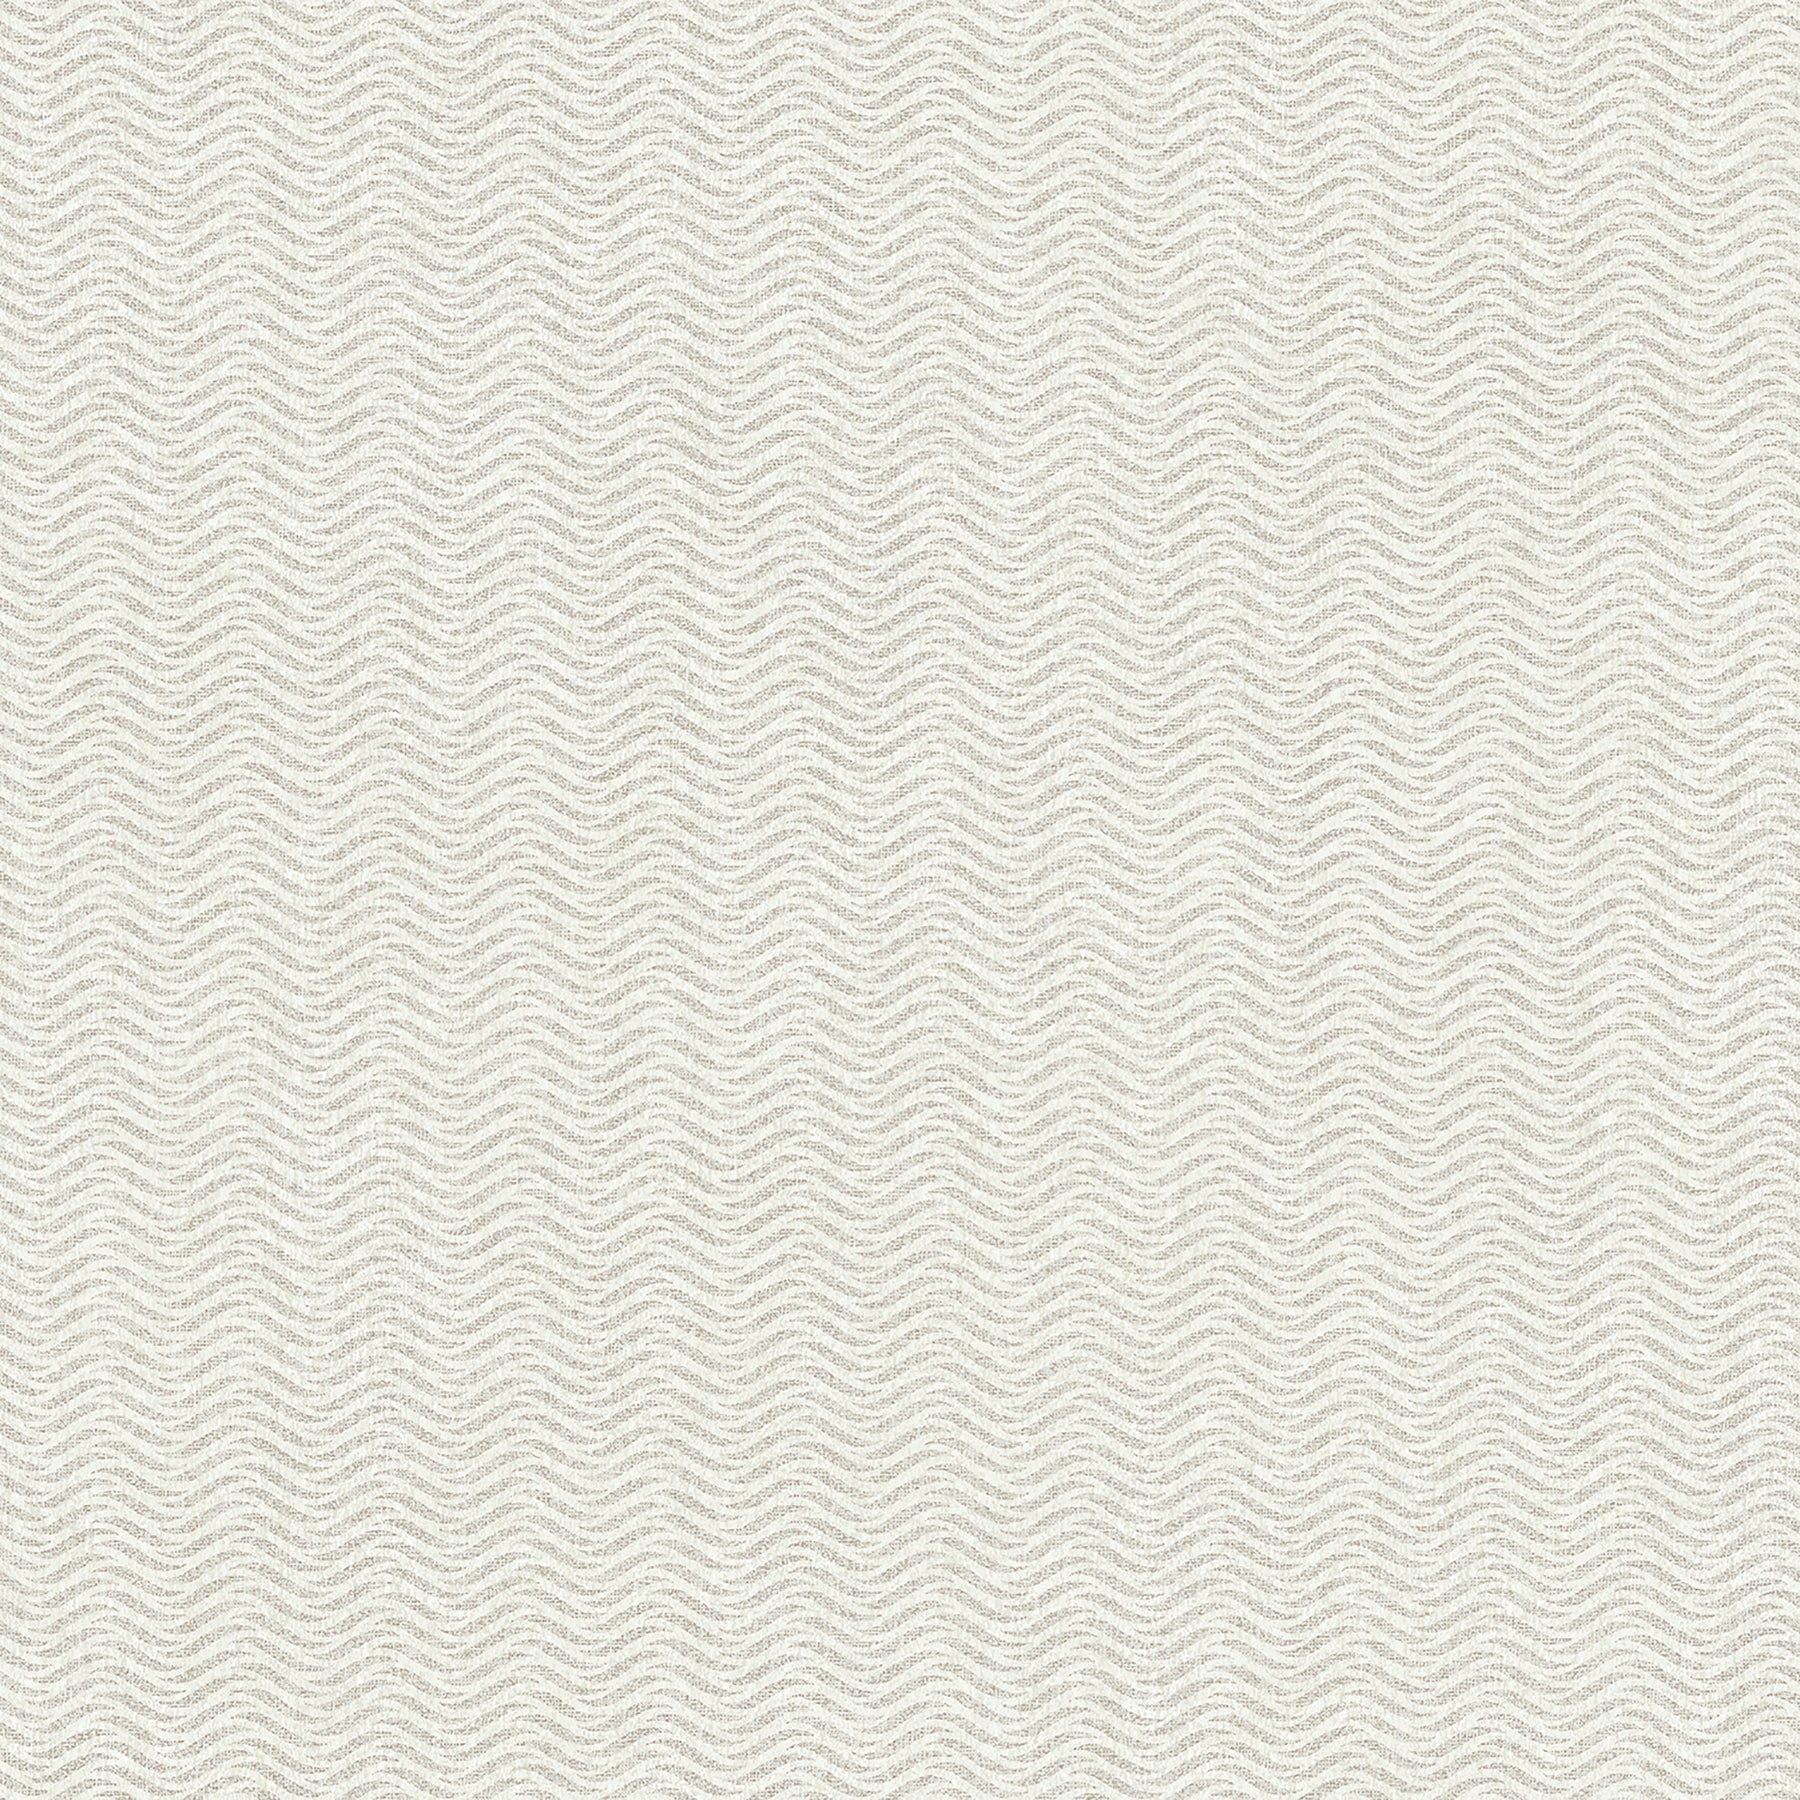 Order 4020-75907 Geo & Textures Jude Taupe Woven Waves Taupe by Advantage